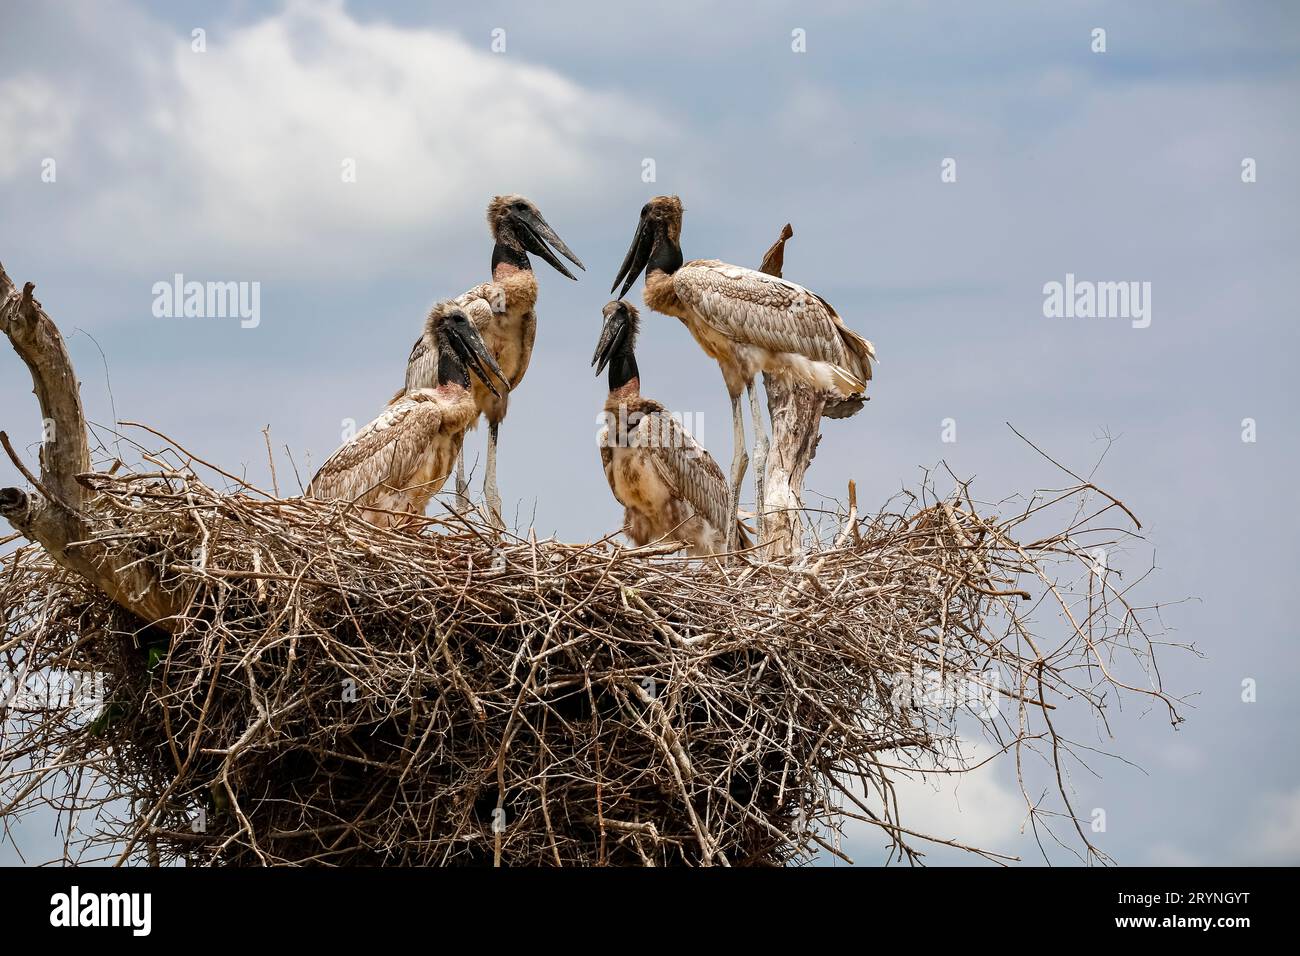 Close-up of a Jabiru nest with four juvenile birds standing and sitting against blu sky and clouds, Stock Photo